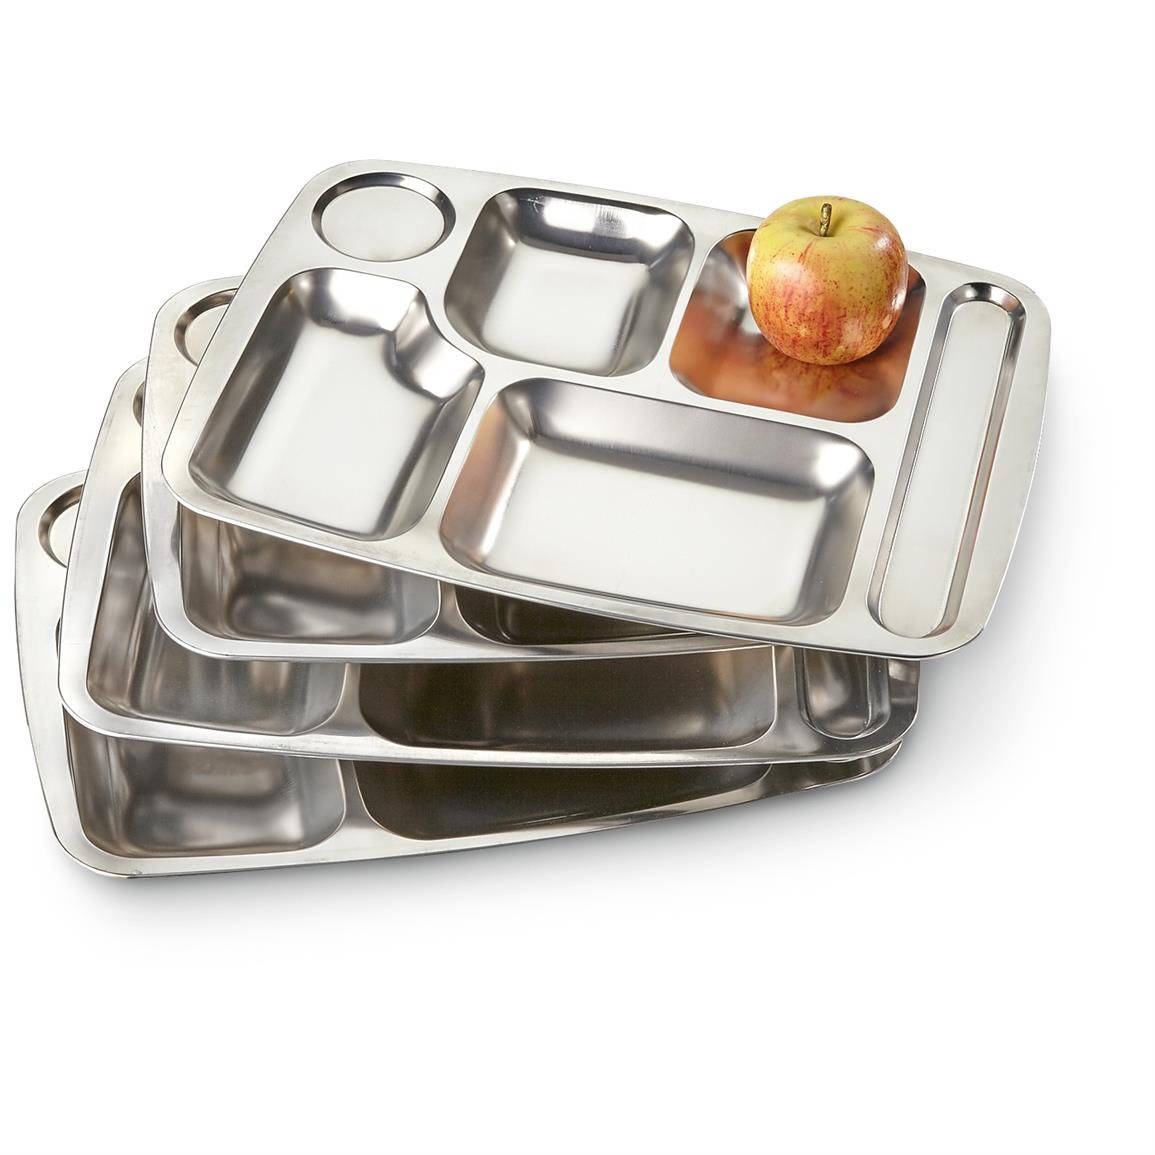 Military-style Stainless Steel Mess Tray, 4 Pack